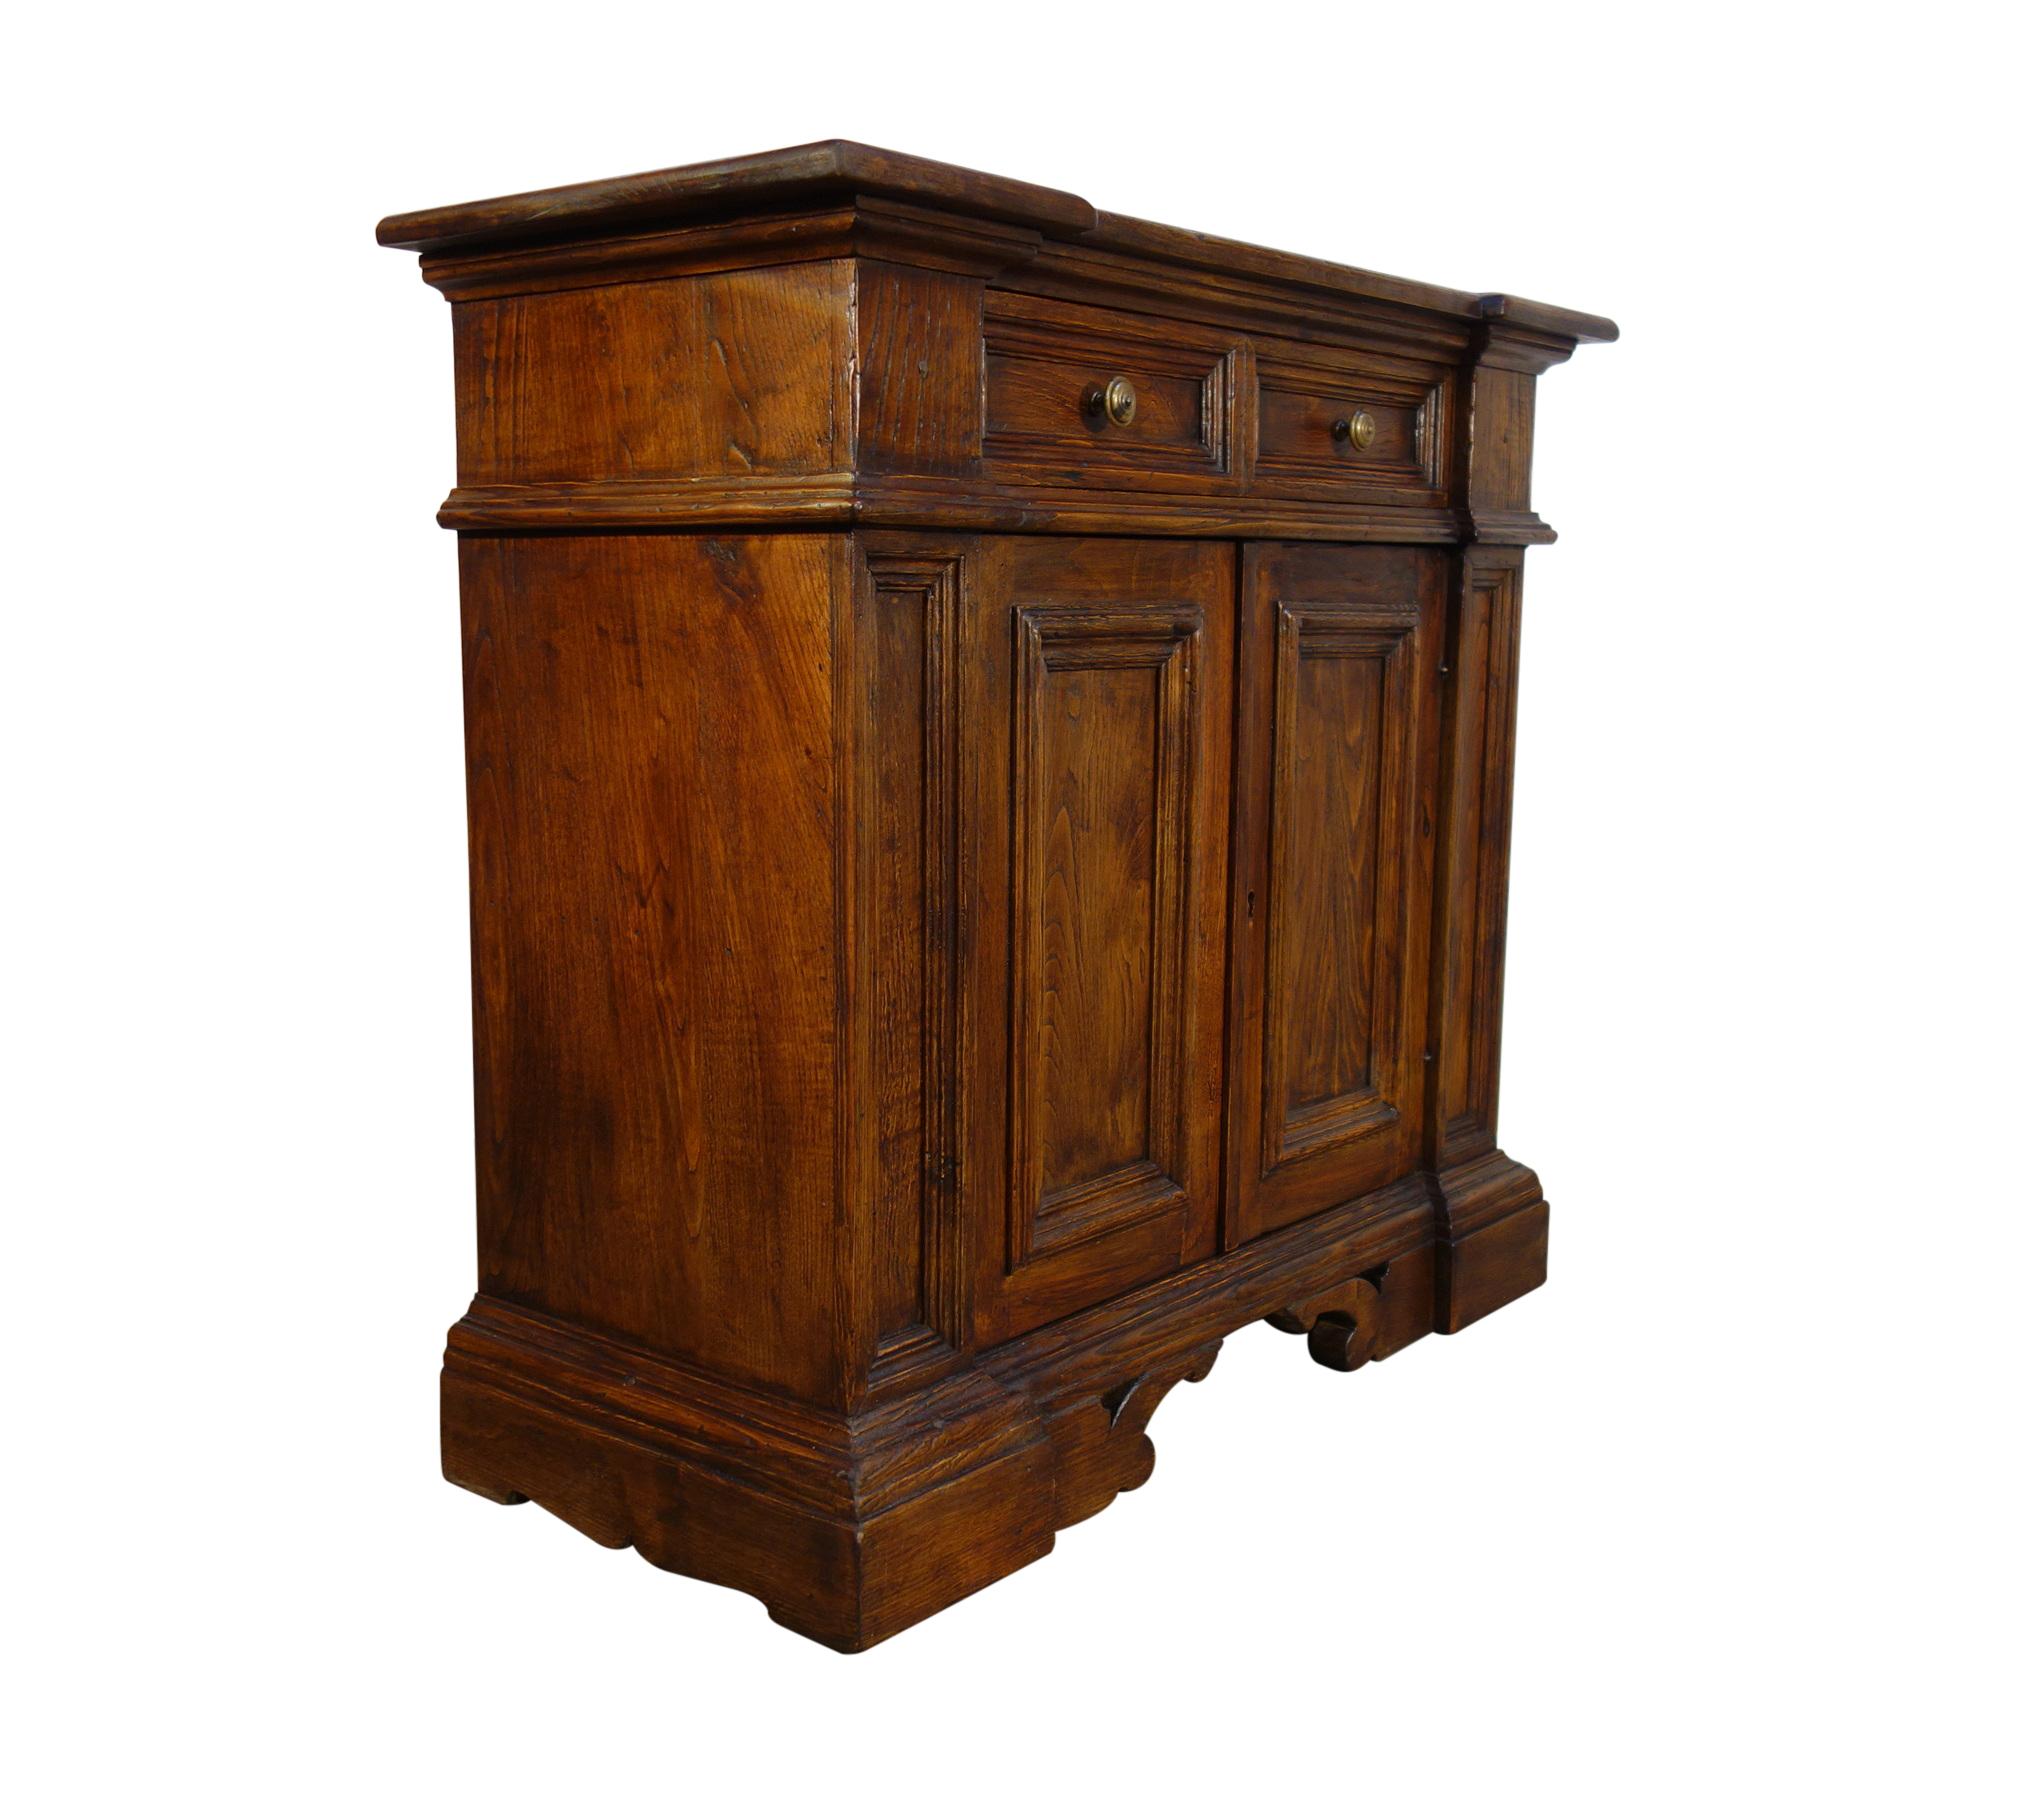 17th Century style Italian small commode in rustic old chestnut, to order and available in custom sizes by quote; 3-4 week production.  Expedited shipping options by quote.

Introducing our “Credenzino” - The Italian Art & Handcraft of Fine Antique